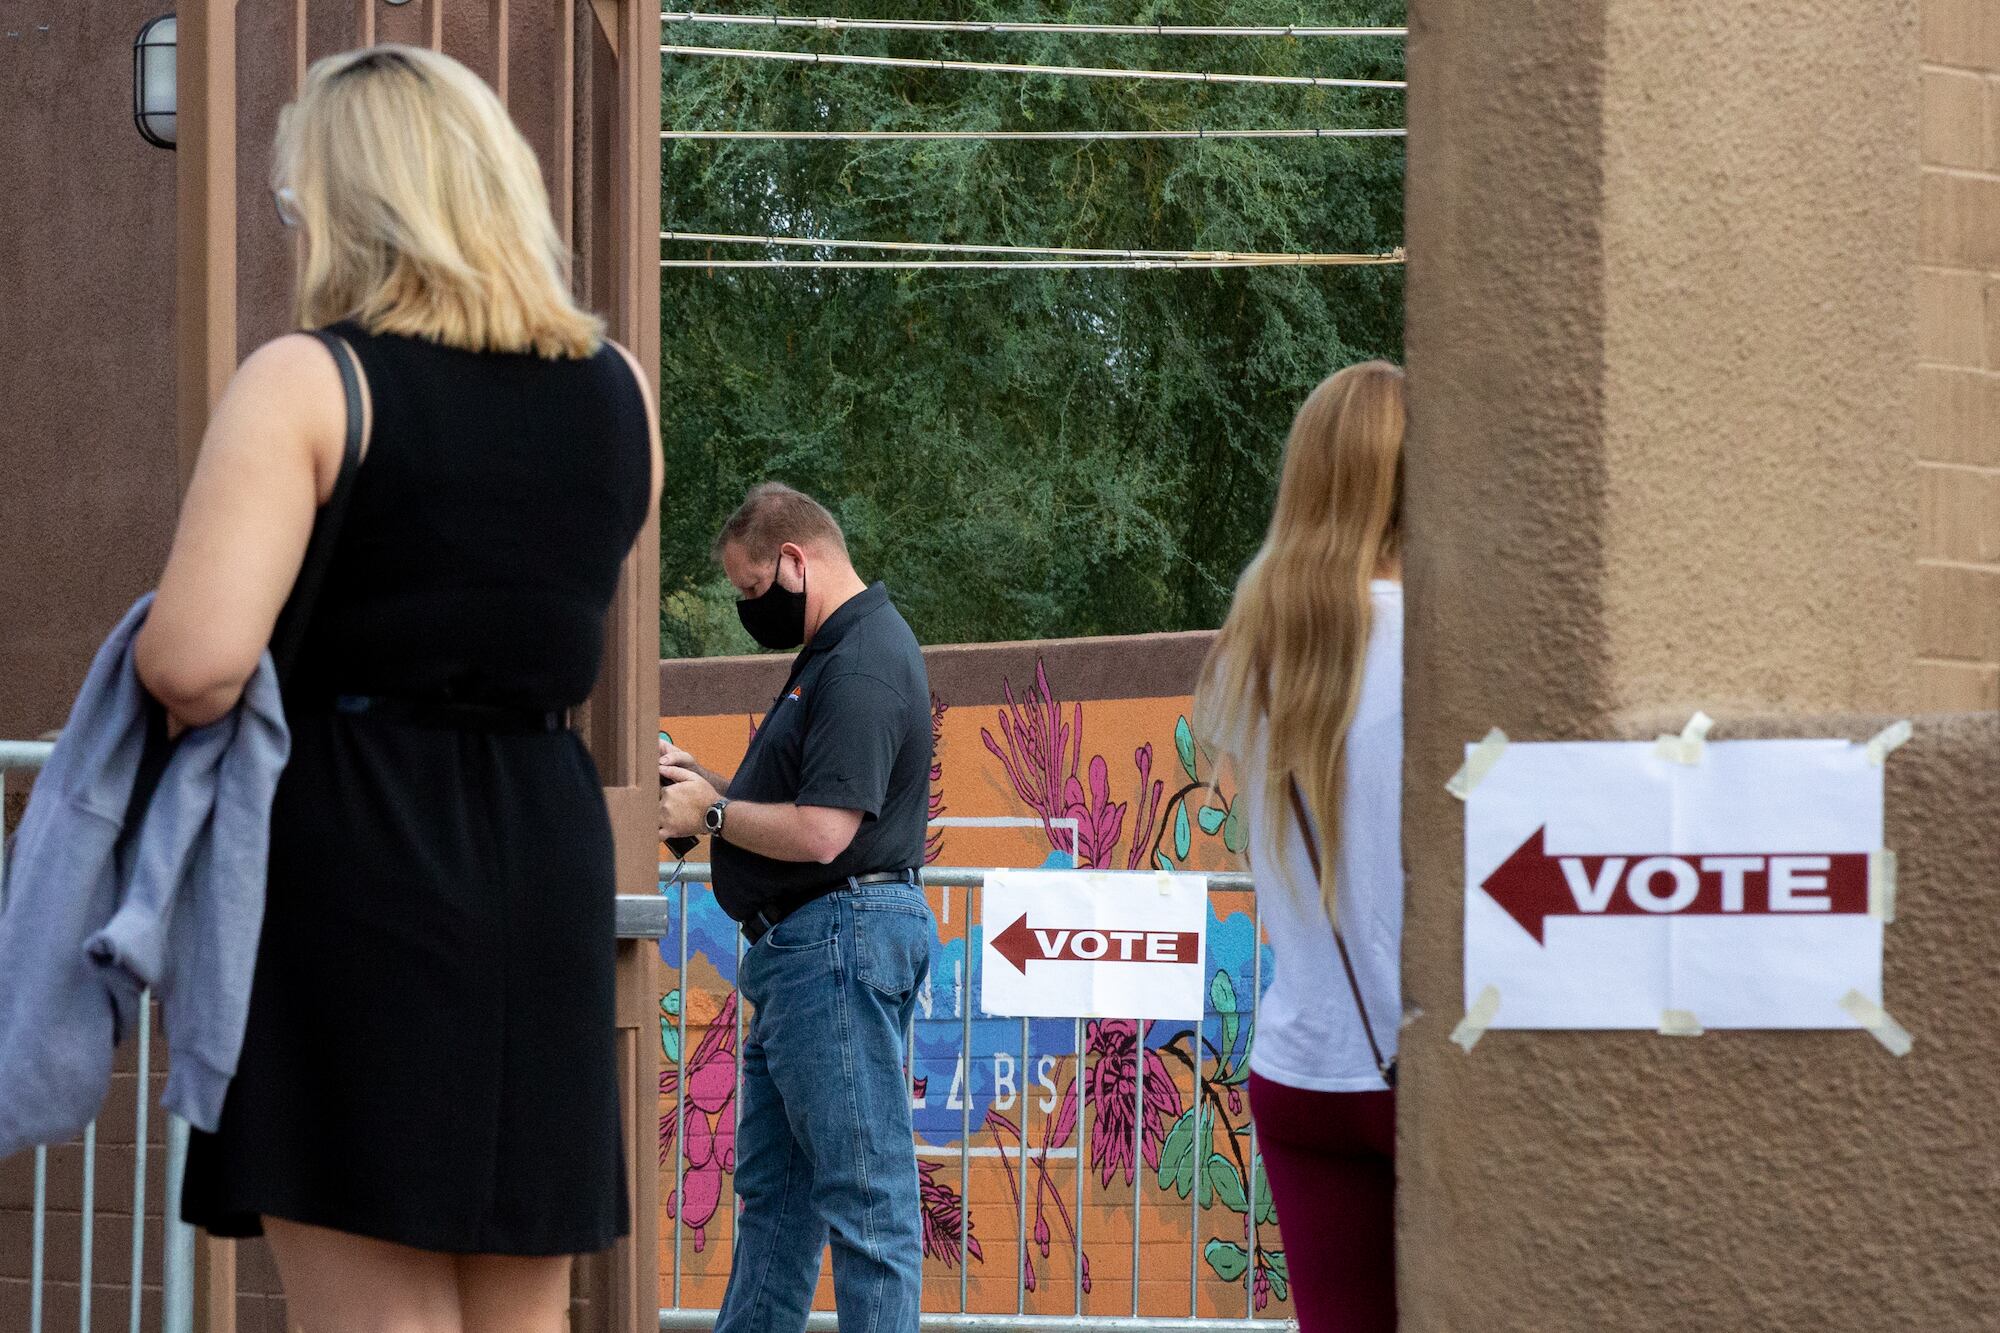 Two women with their backs to the camera and a masked man wait against beige pillars plastered with signs reading “vote.”